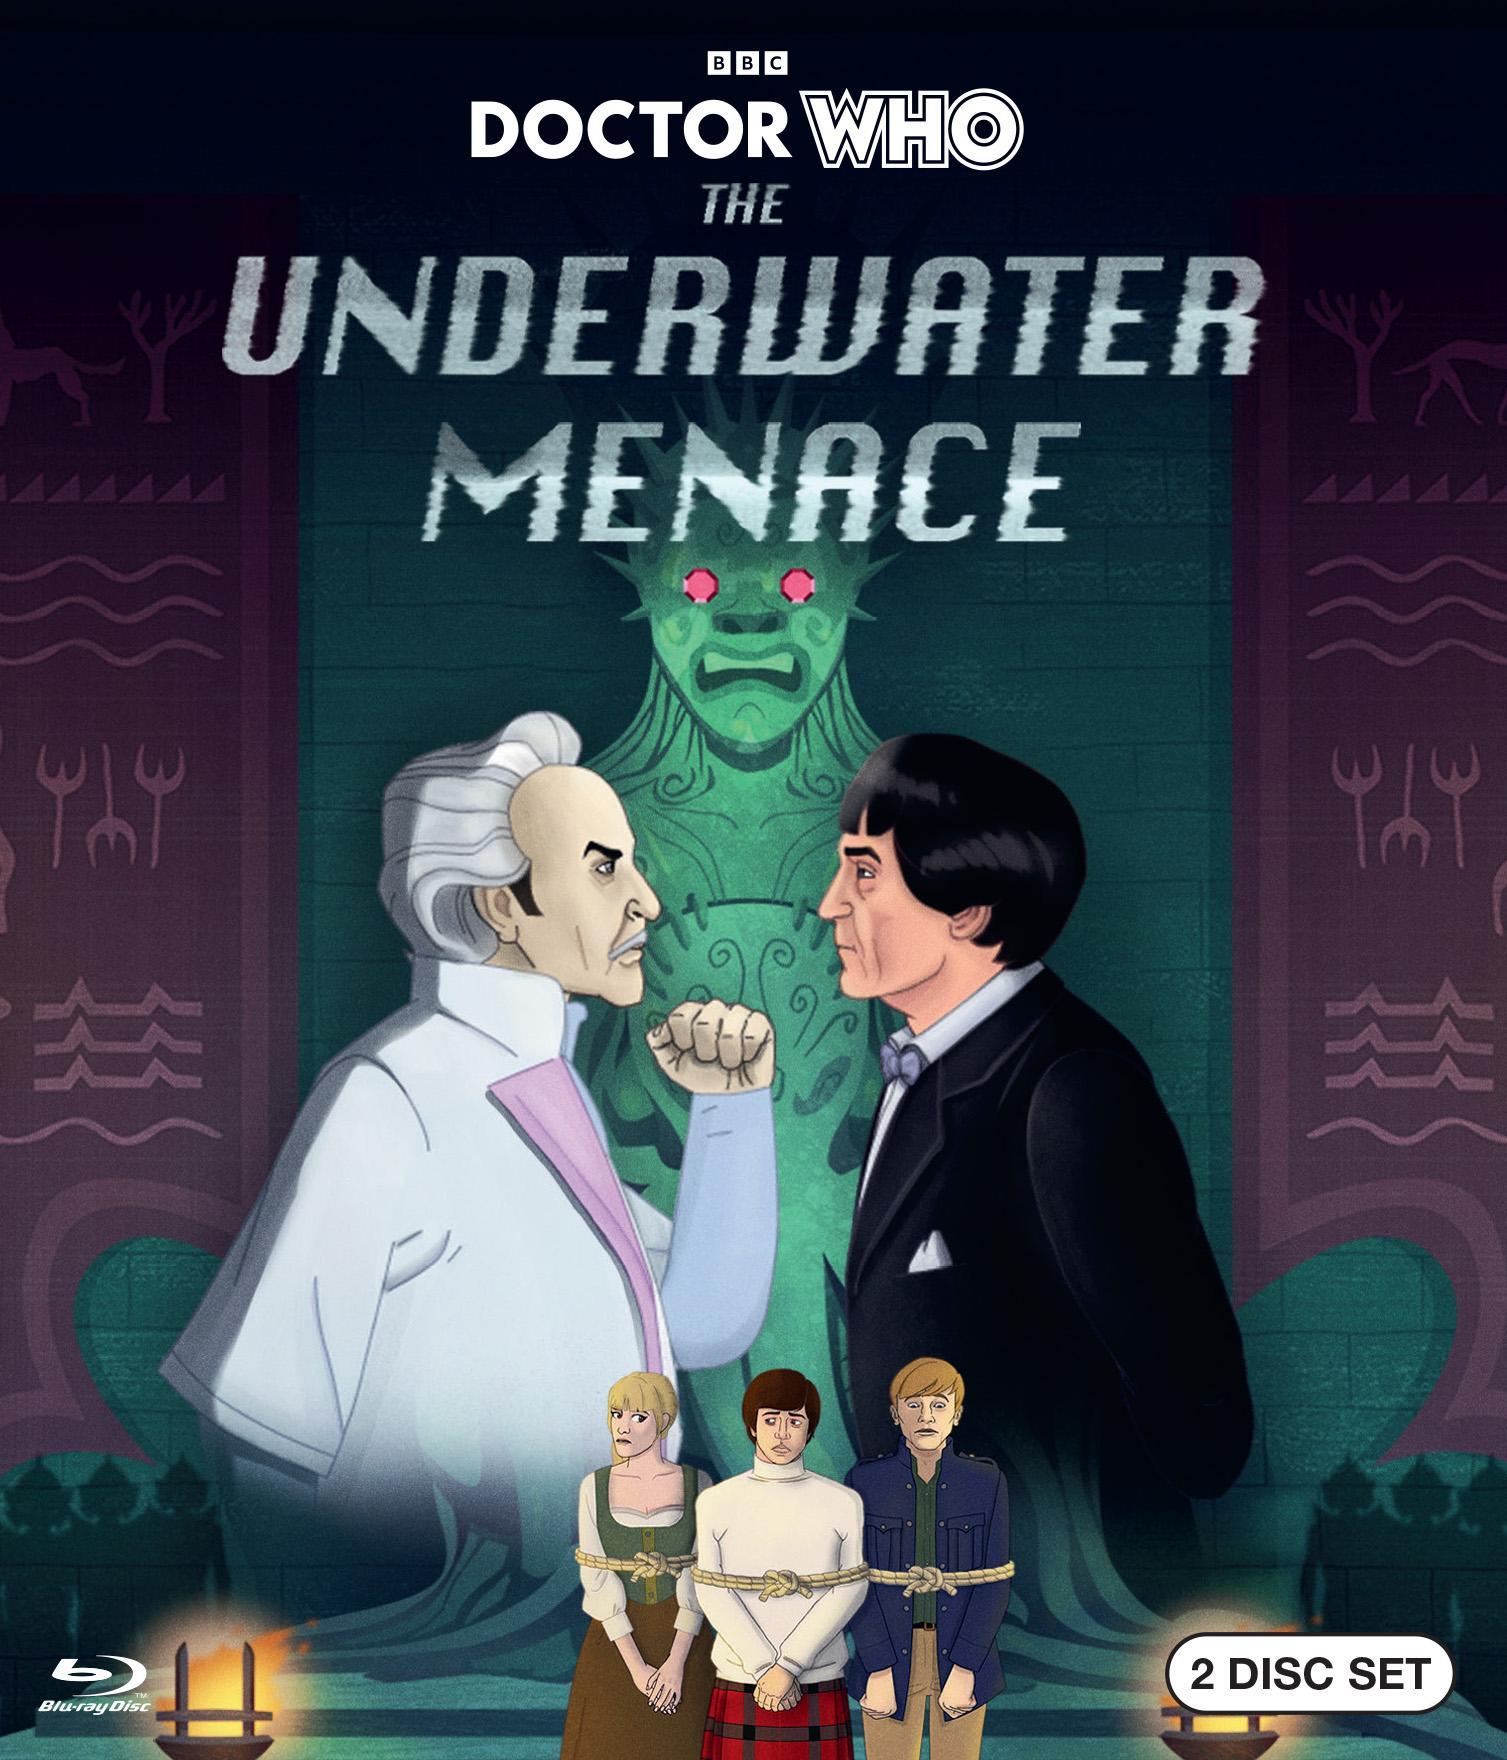 Doctor Who: The Underwater Menace - Blu-ray